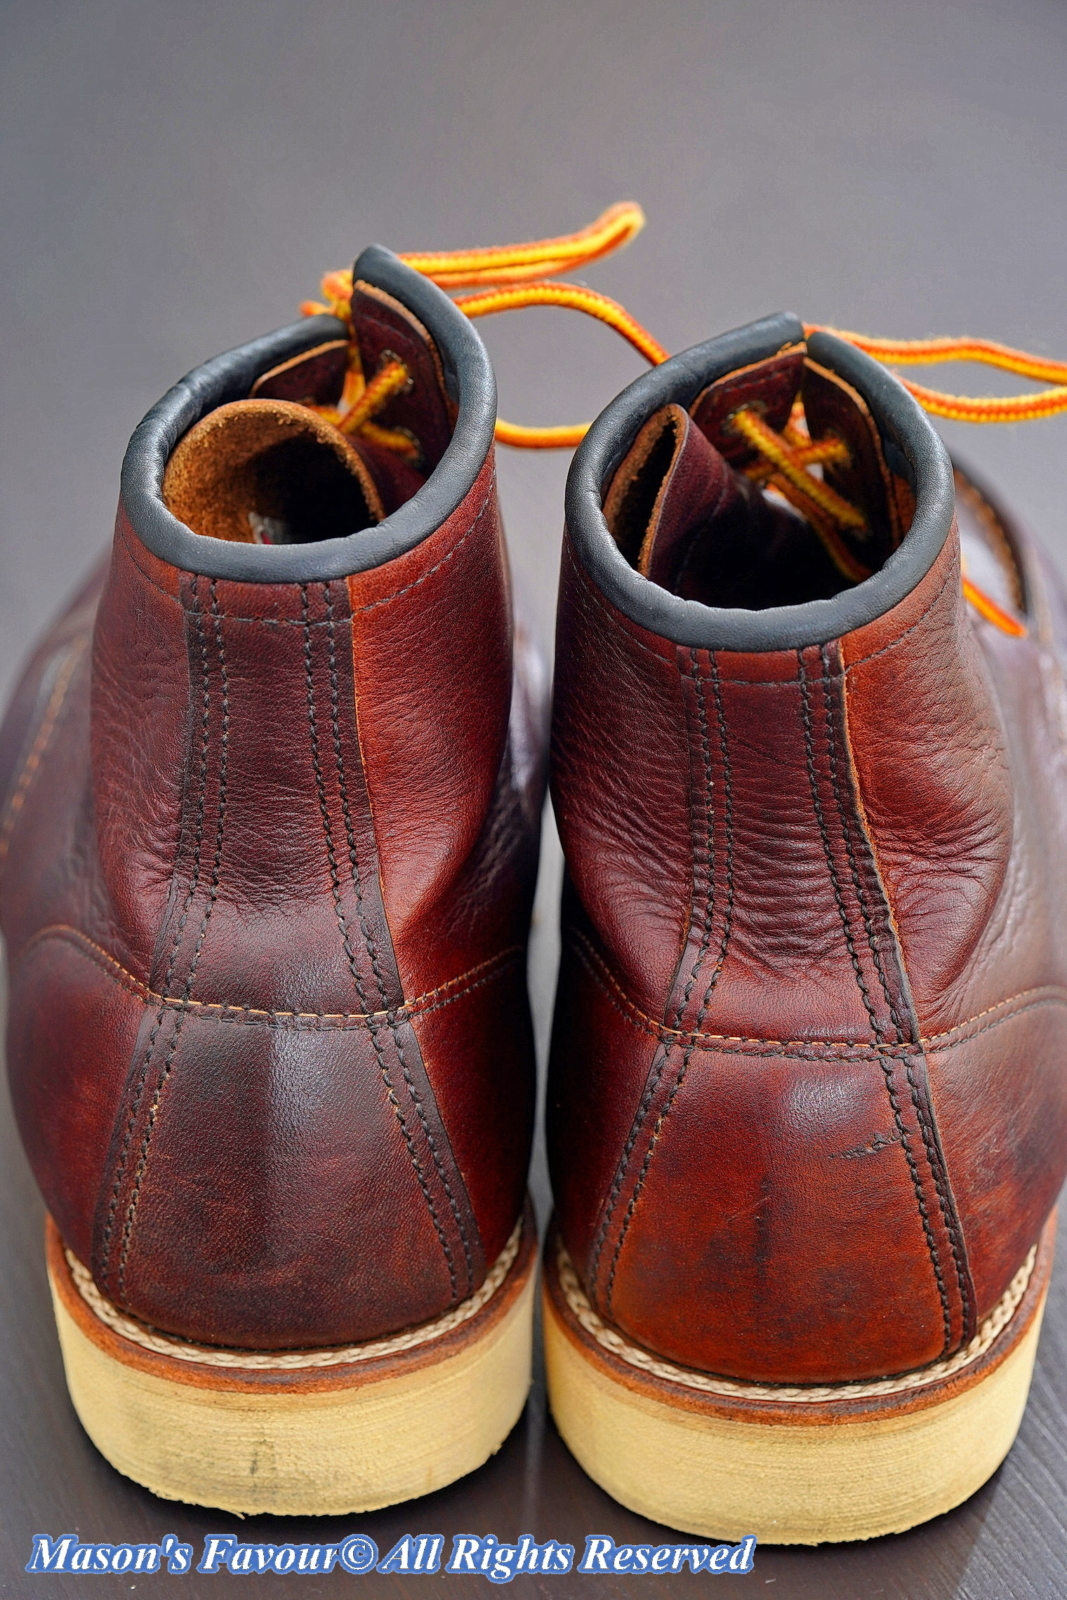 Red Wing 8138 MOC Toe, Rear Enlarged View